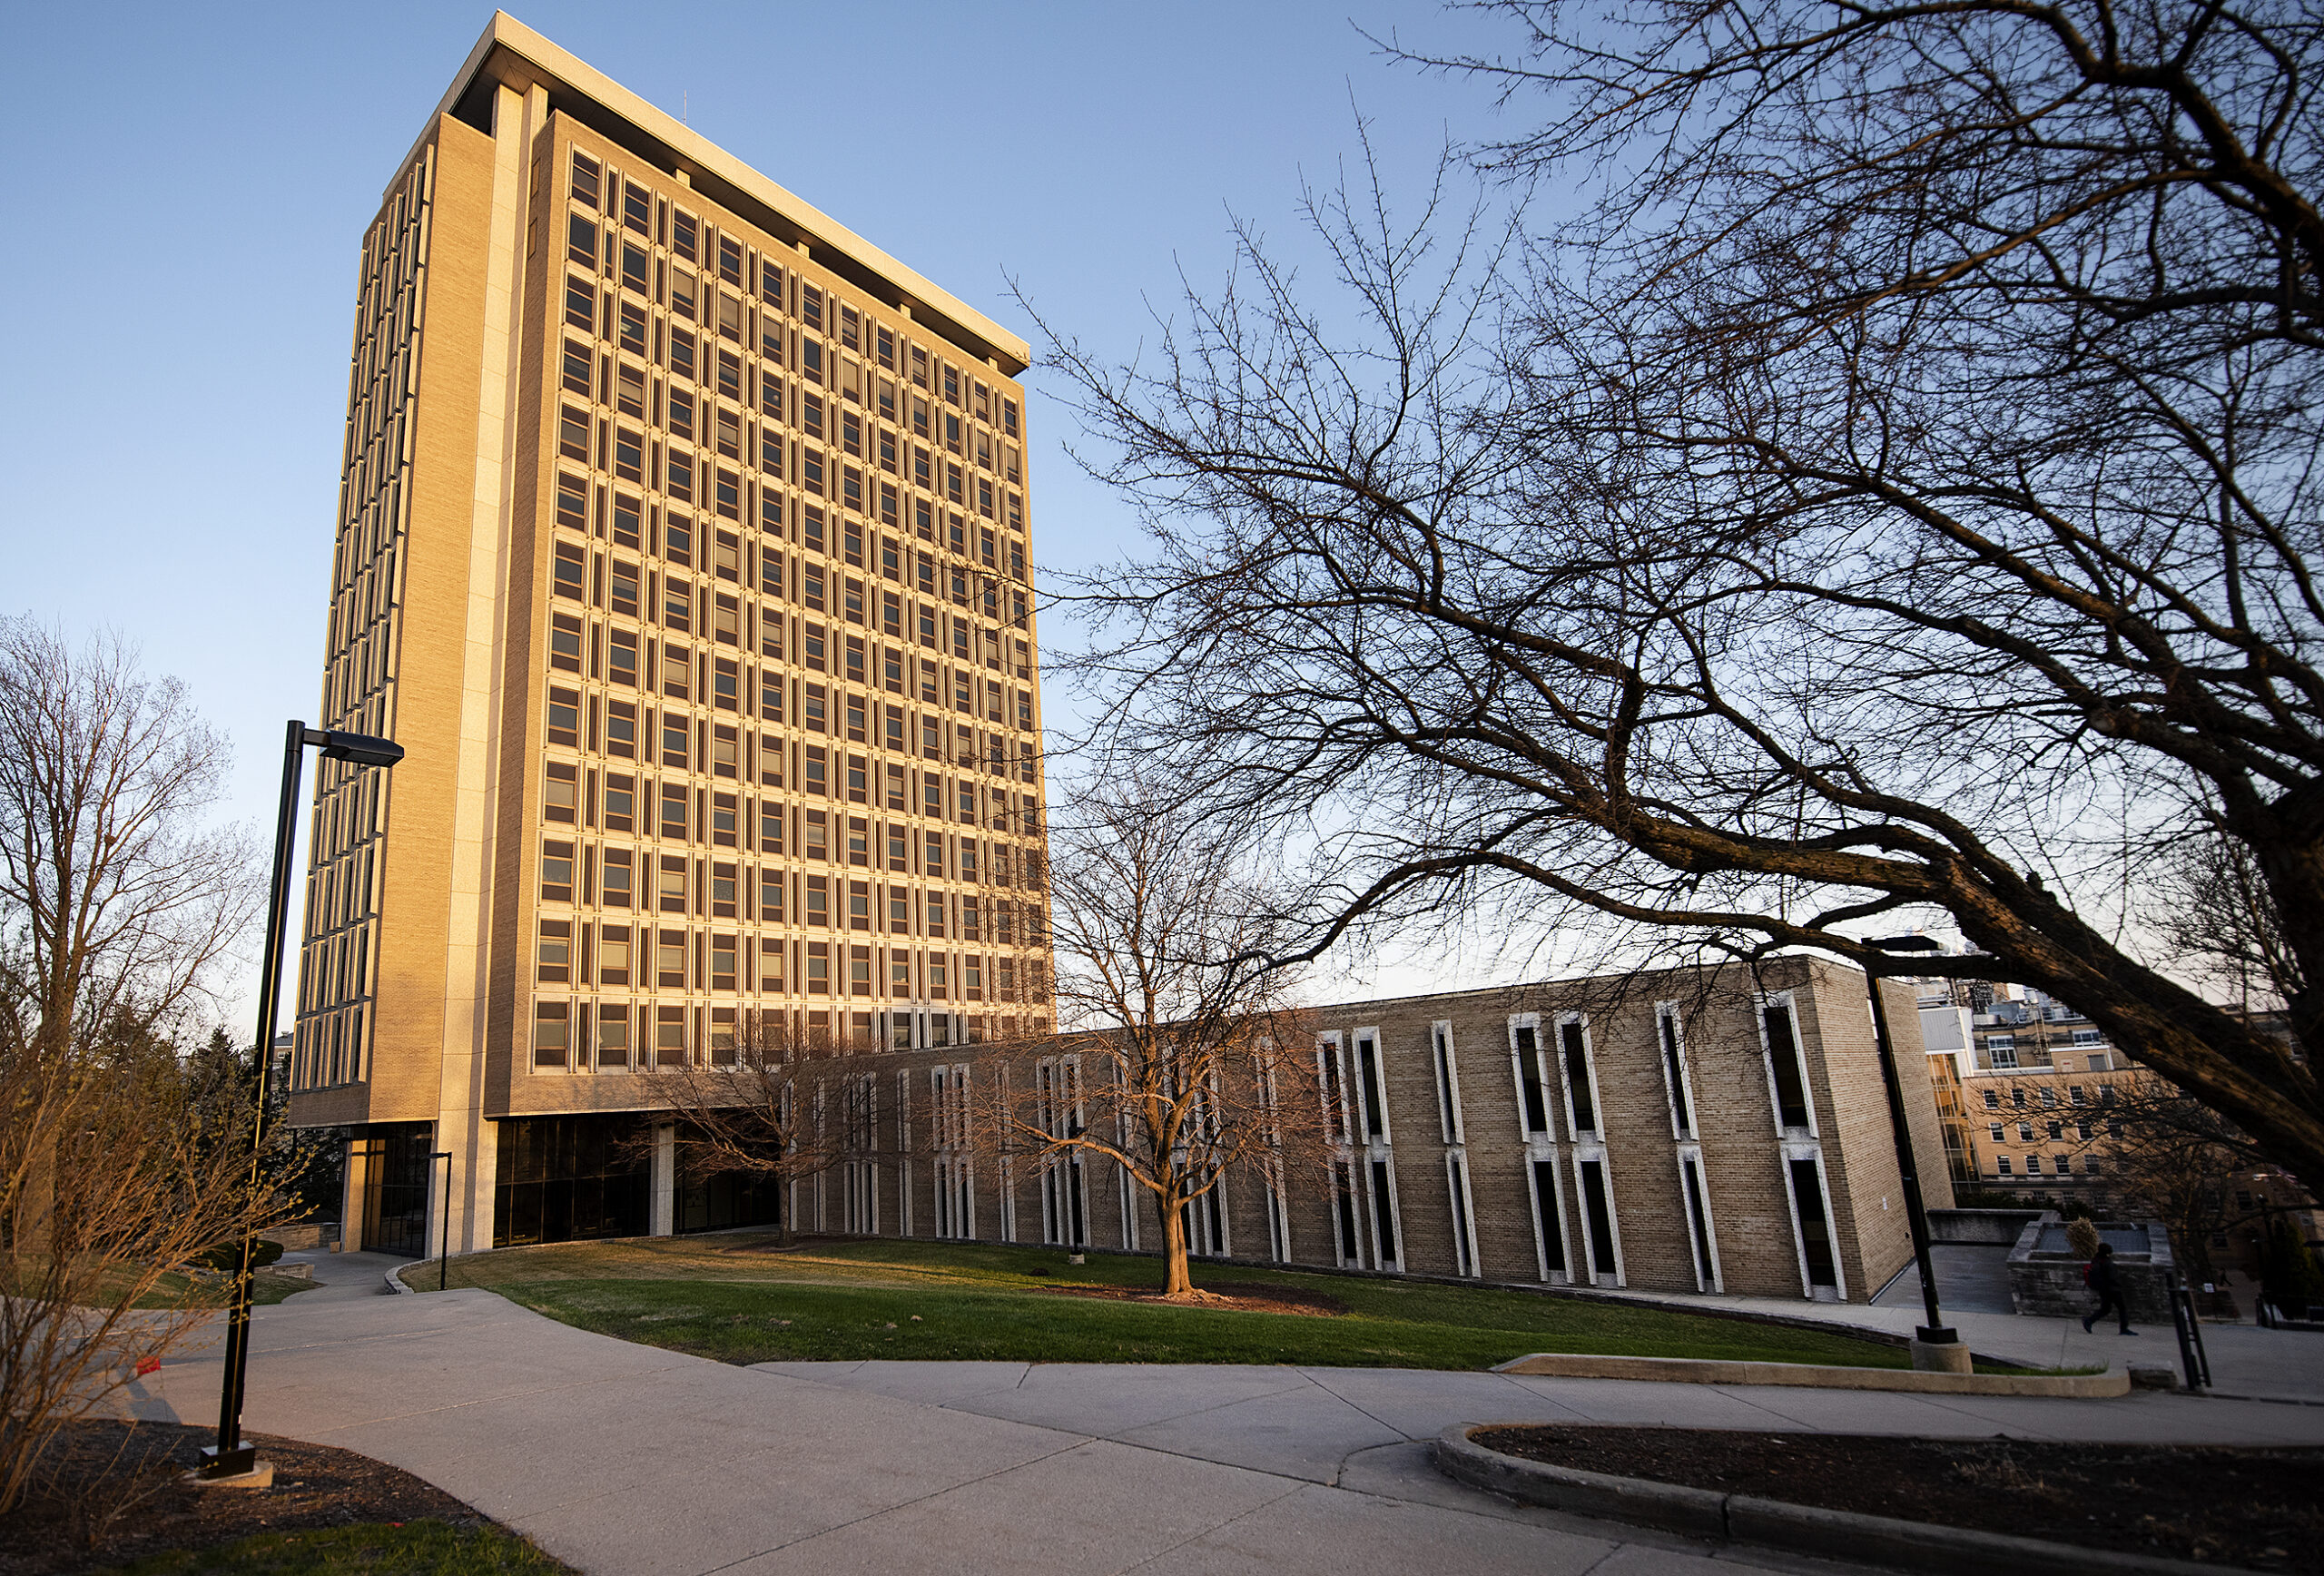 Most UW System campuses have budget deficits in the millions